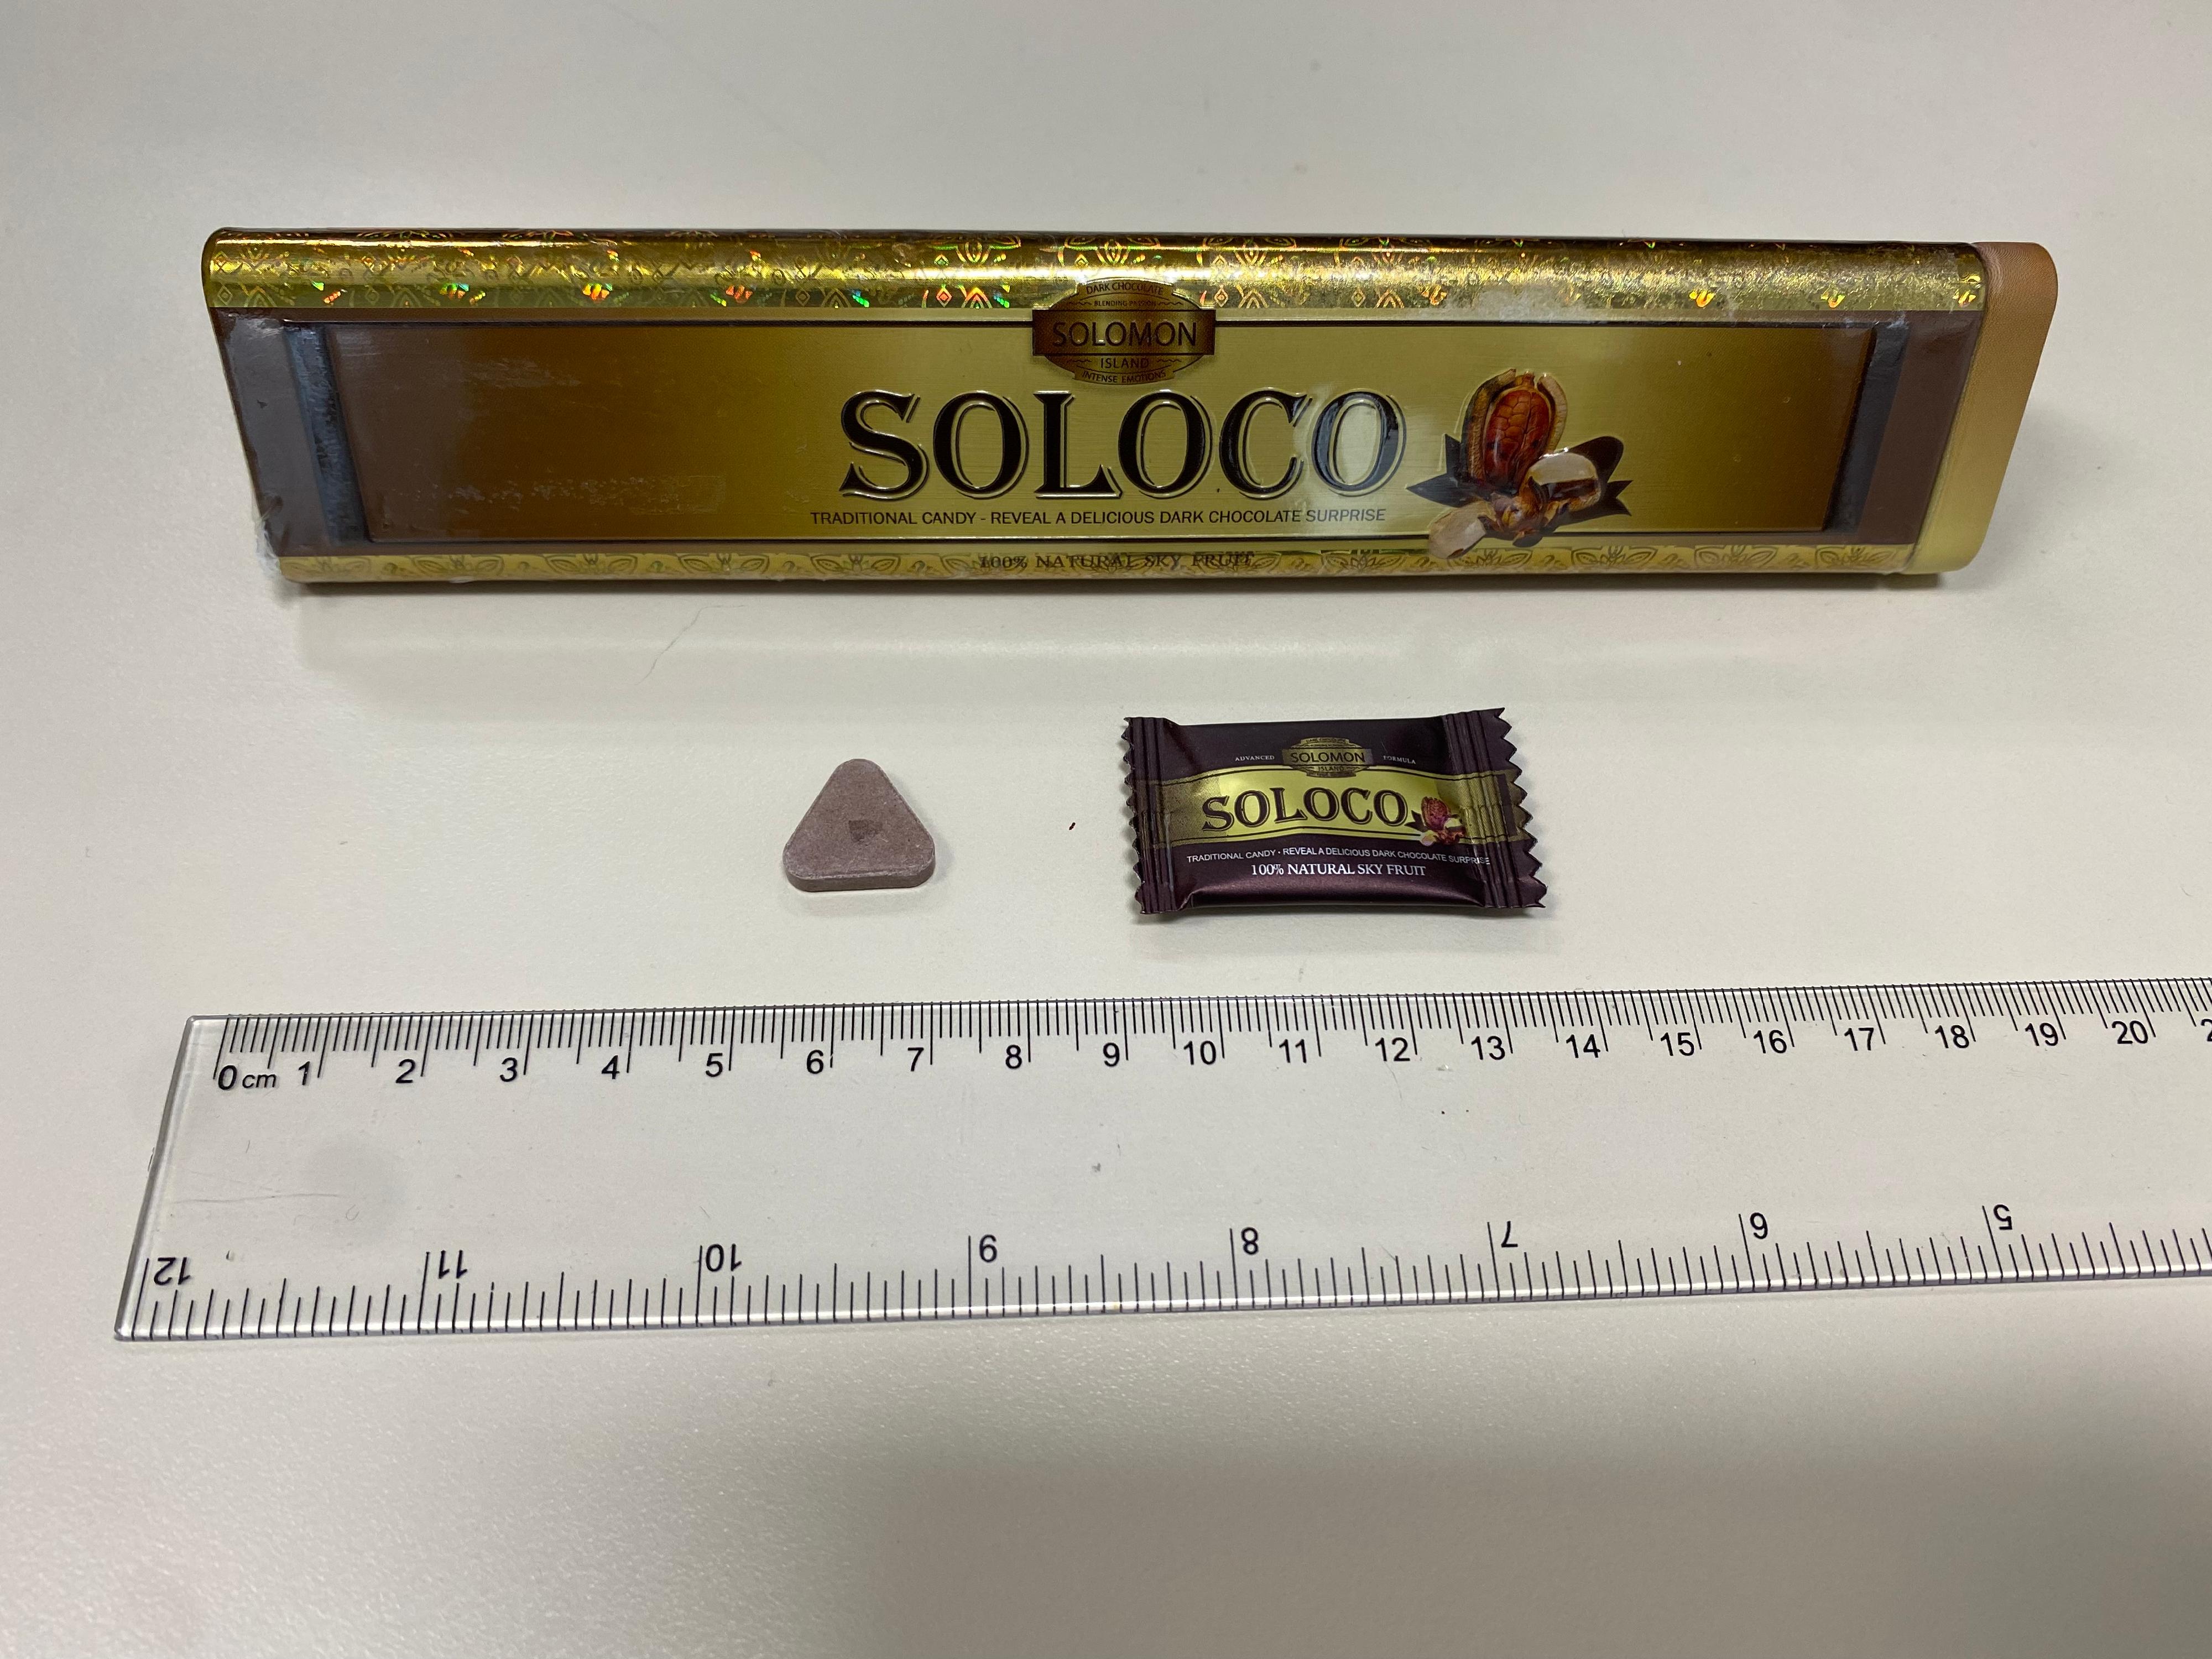 The Department of Health today (February 27) urged the public not to buy or consume a product named 
Soloco as it was found to contain an undeclared controlled ingredient.